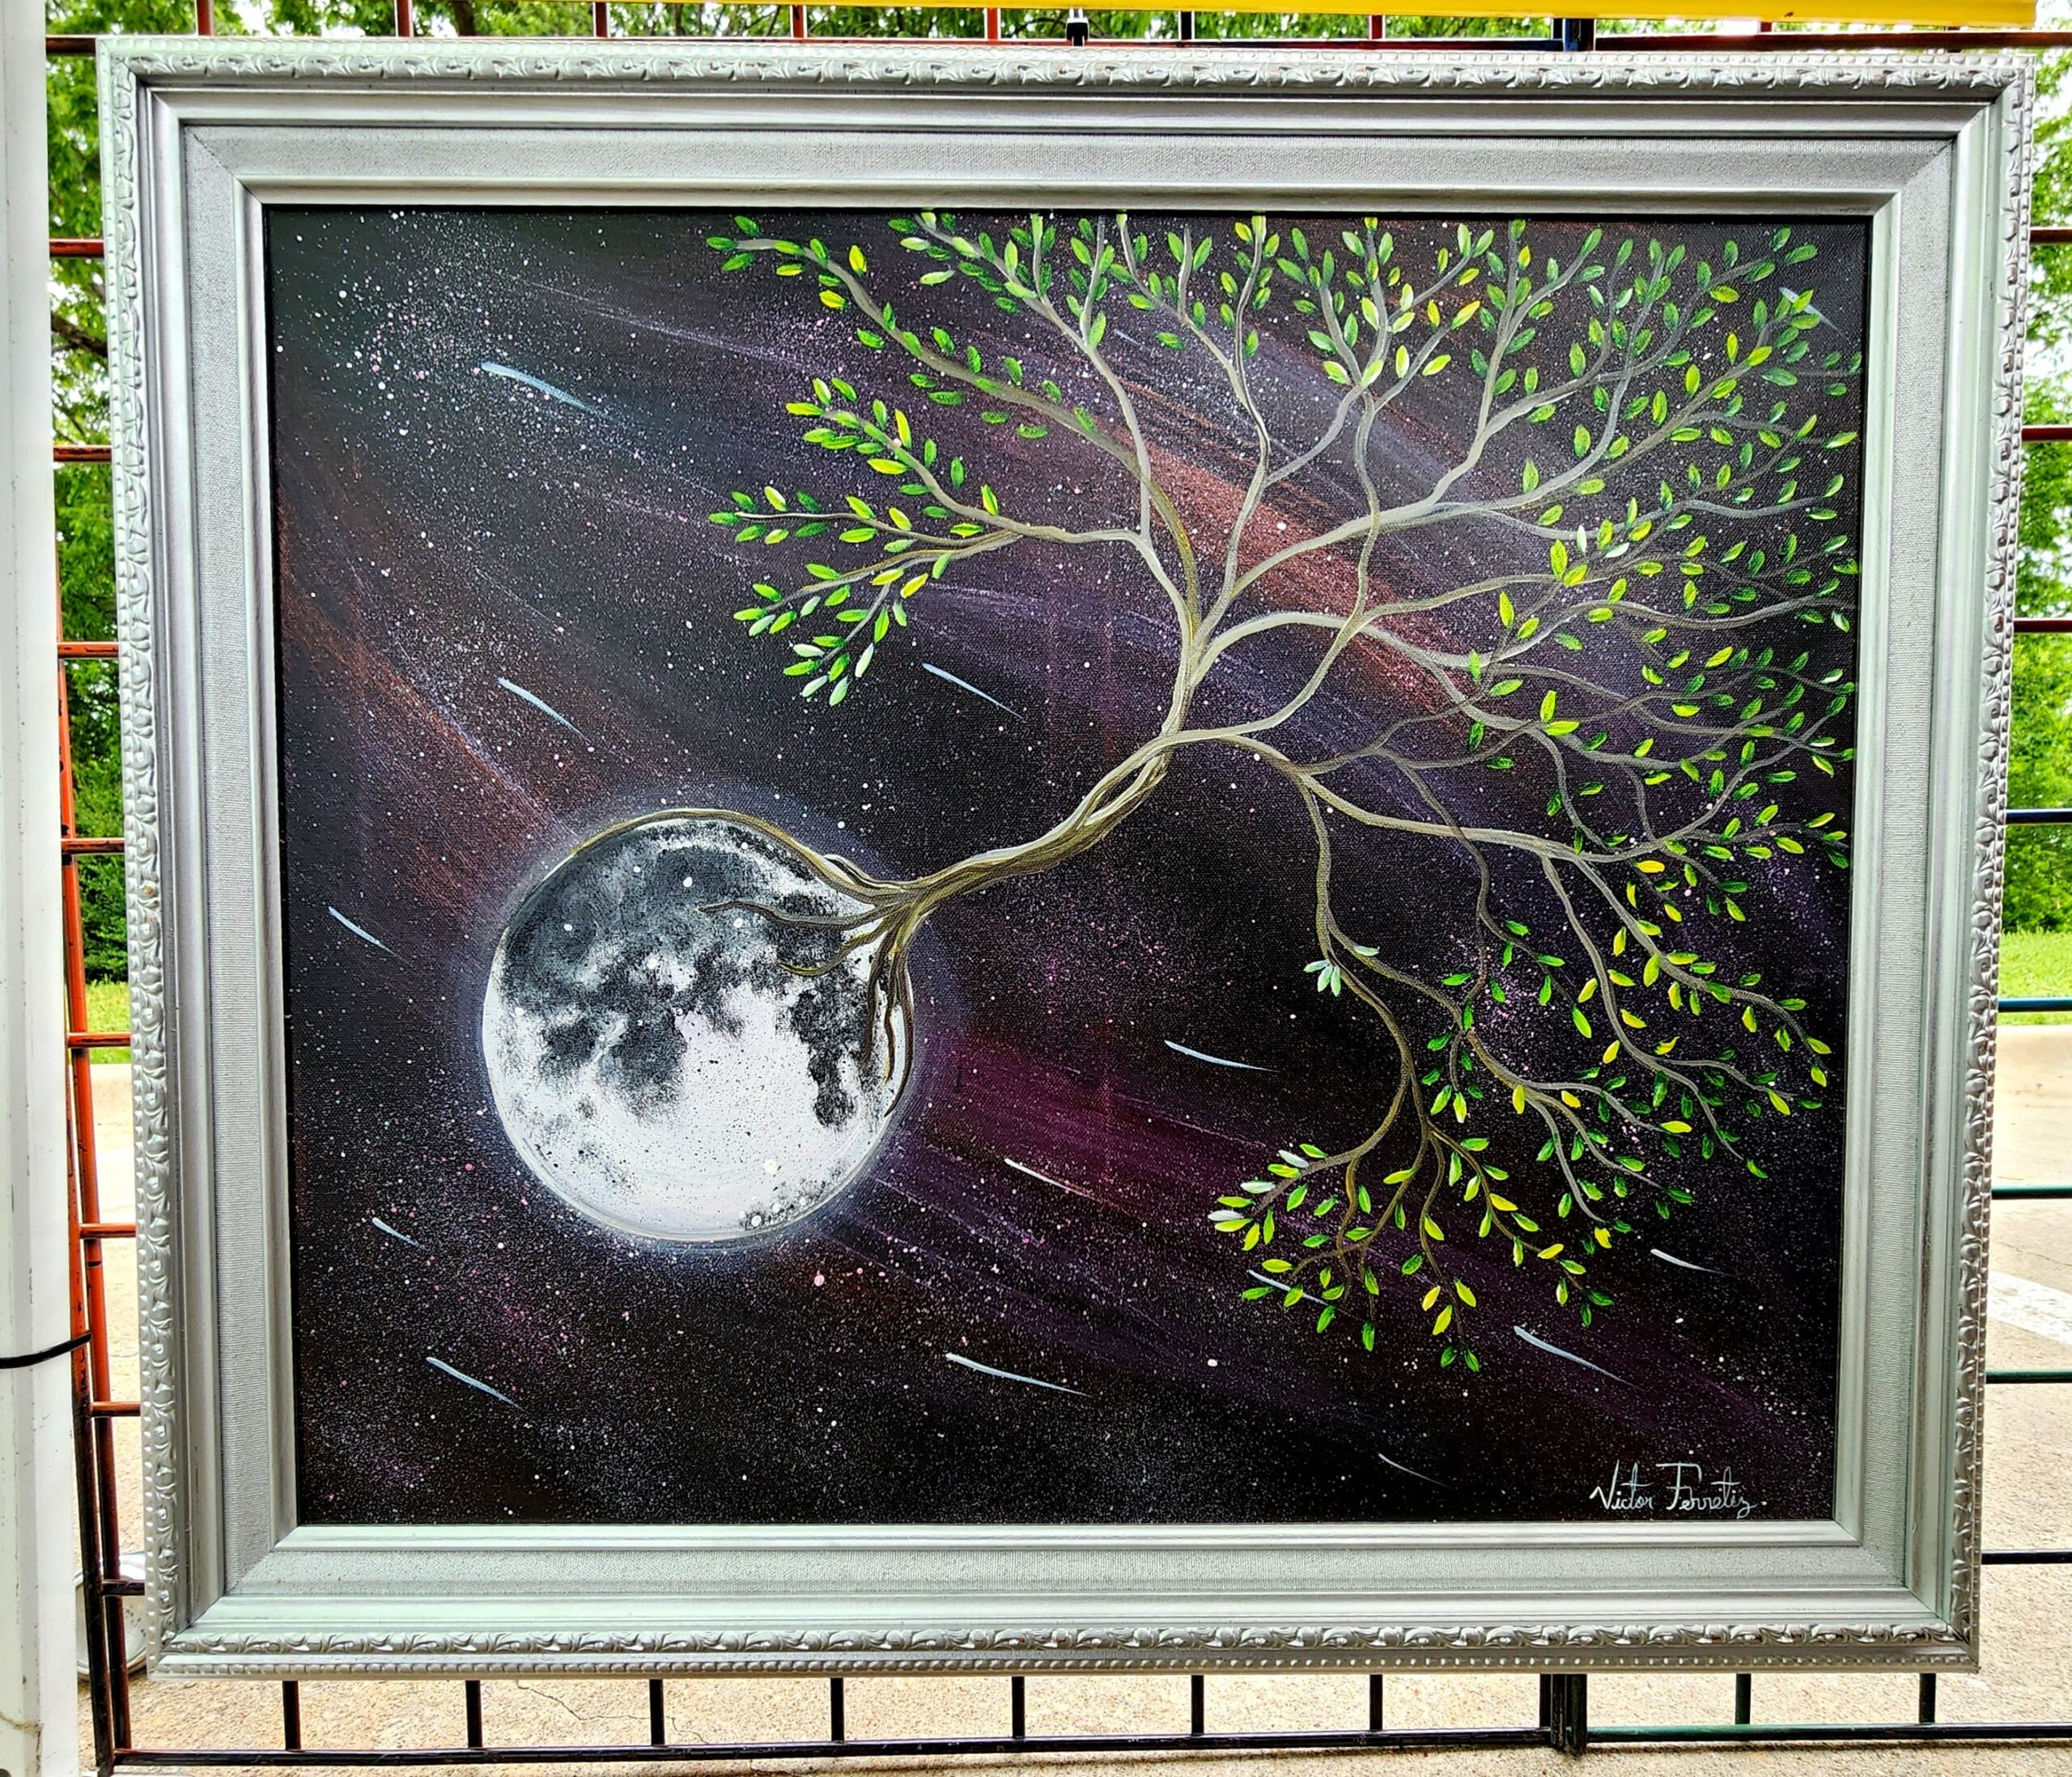 This is a magical and surrealistic depiction of the moon and a tree suspended in the universe without the disruption of humans. Painted wooden frame.
Painting size: 20"x24"